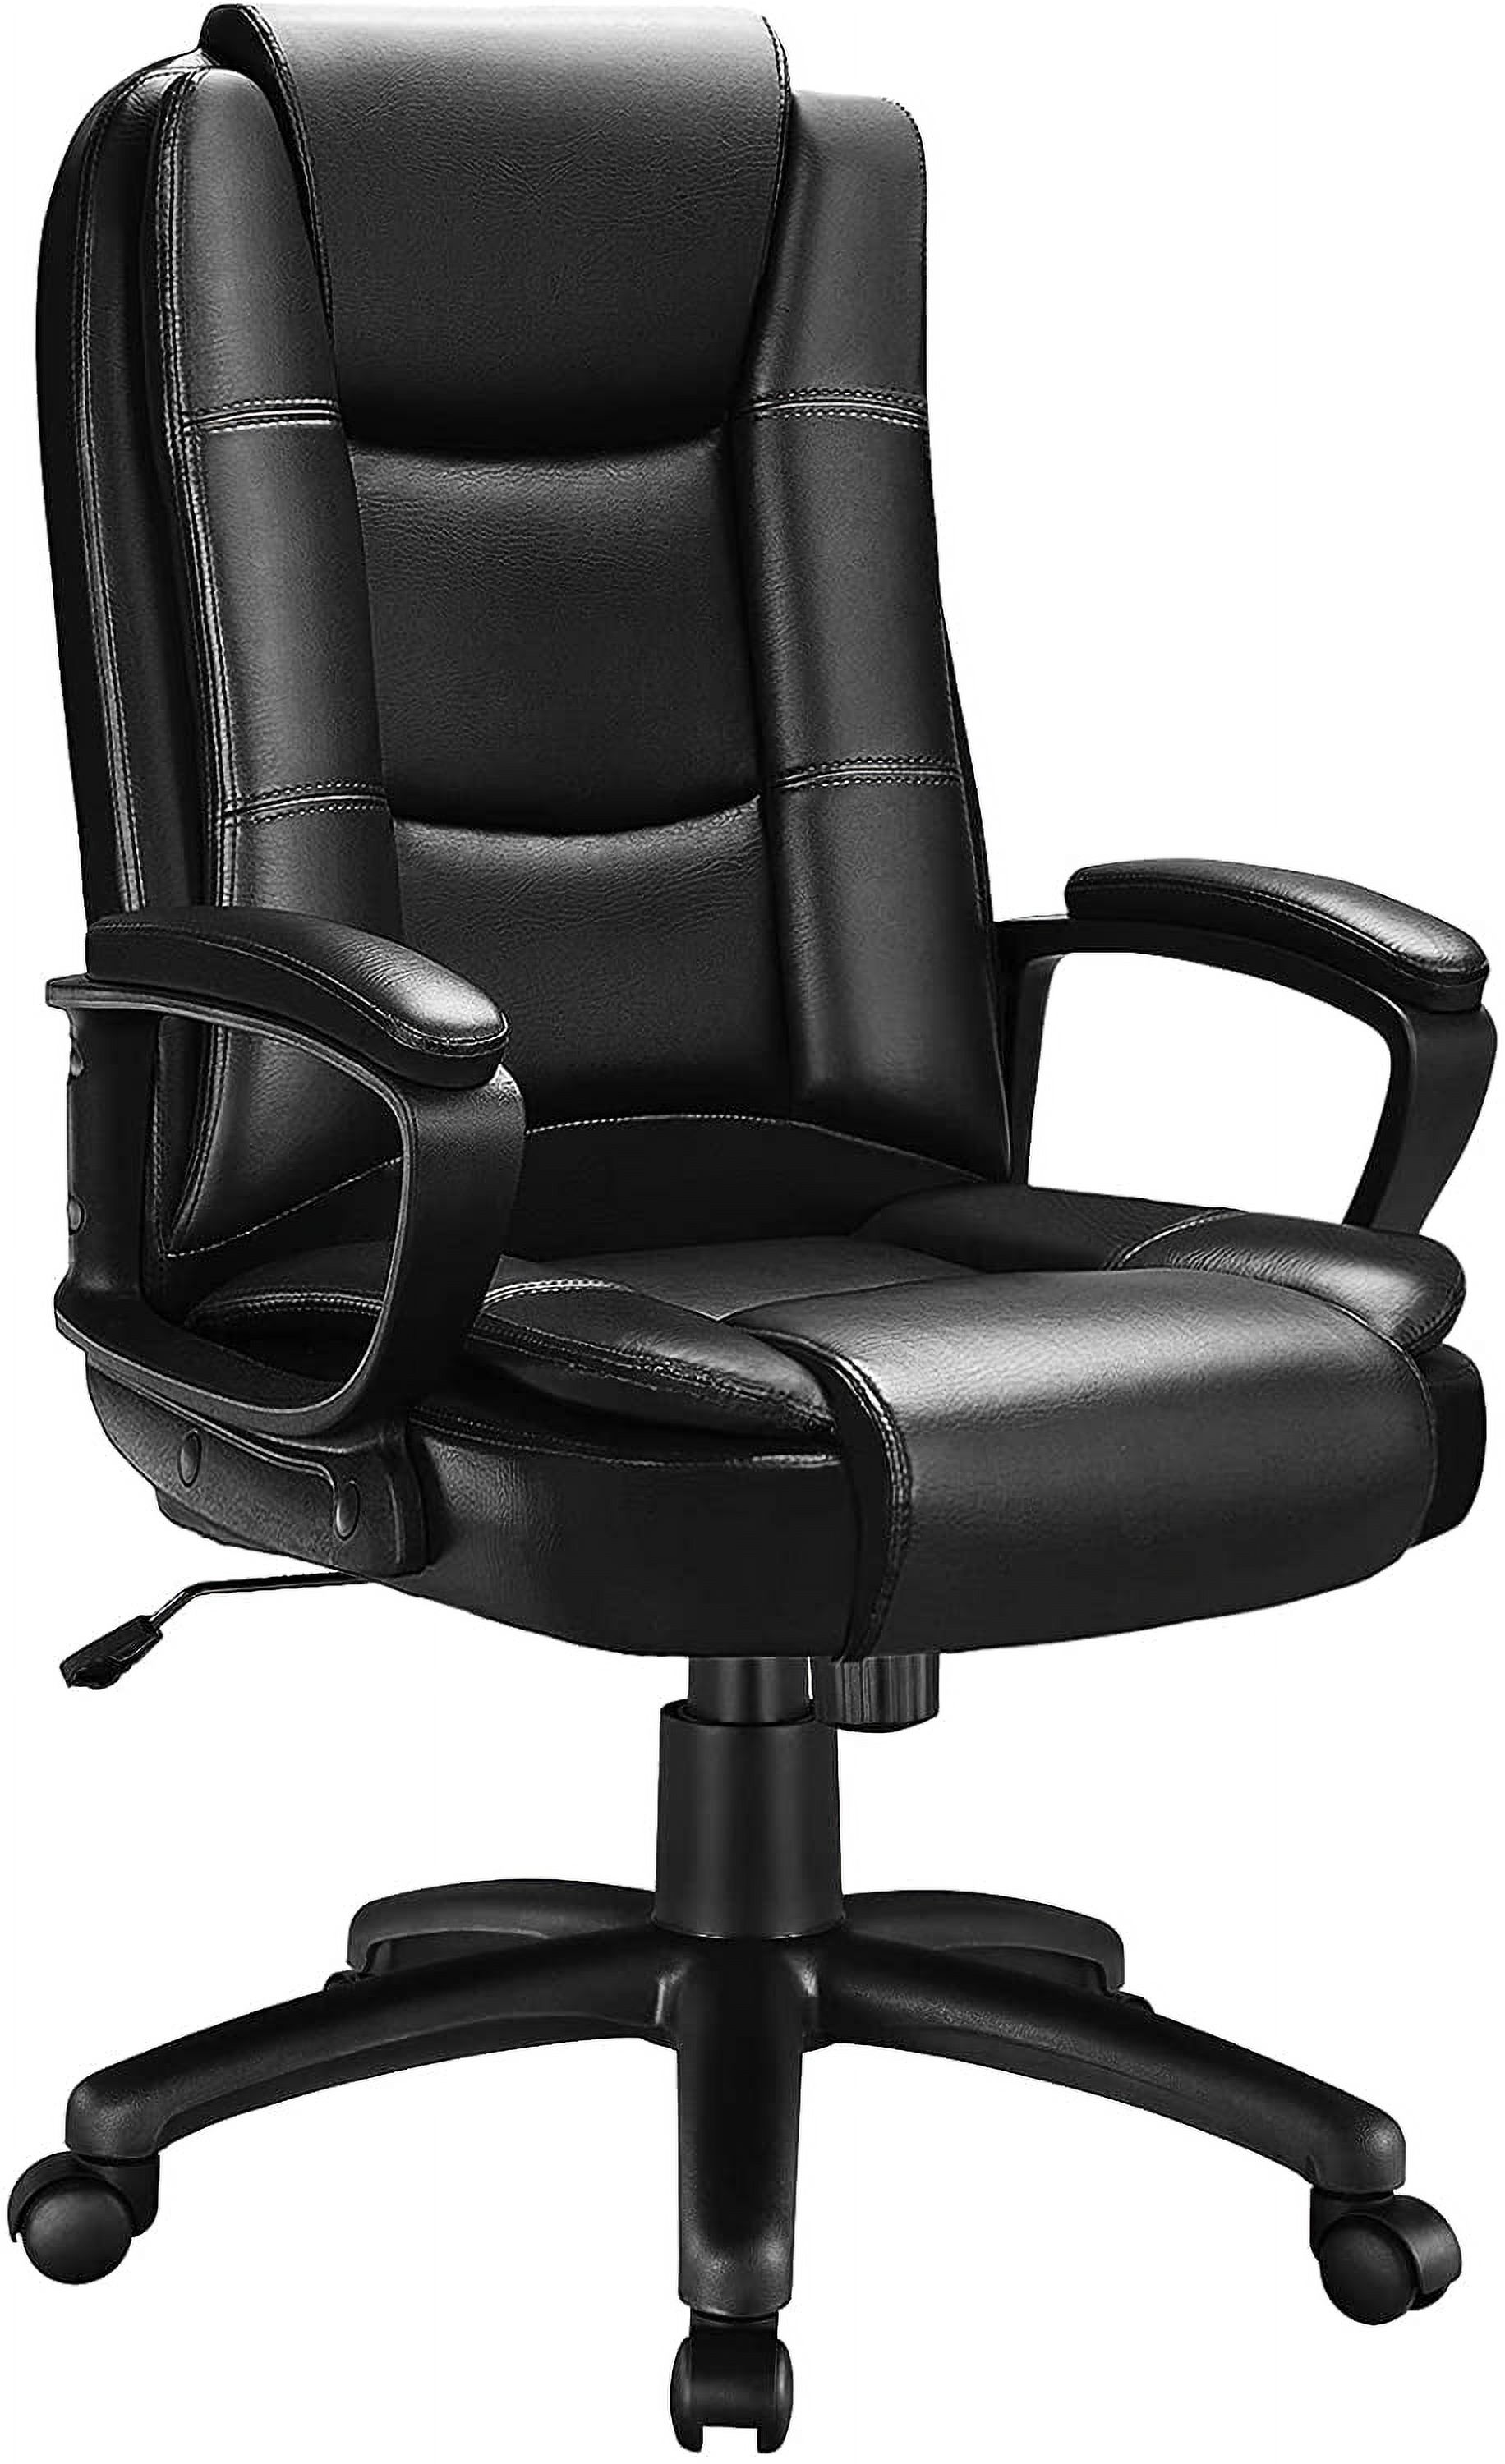 Waleaf Home Office Chair, Big and Tall Desk Chair 8Hours Heavy Duty Design, Ergonomic High Back Cushion Lumbar Back Support, Computer Desk Chair, Adjustable Executive Leather Chair with Arms - image 1 of 8